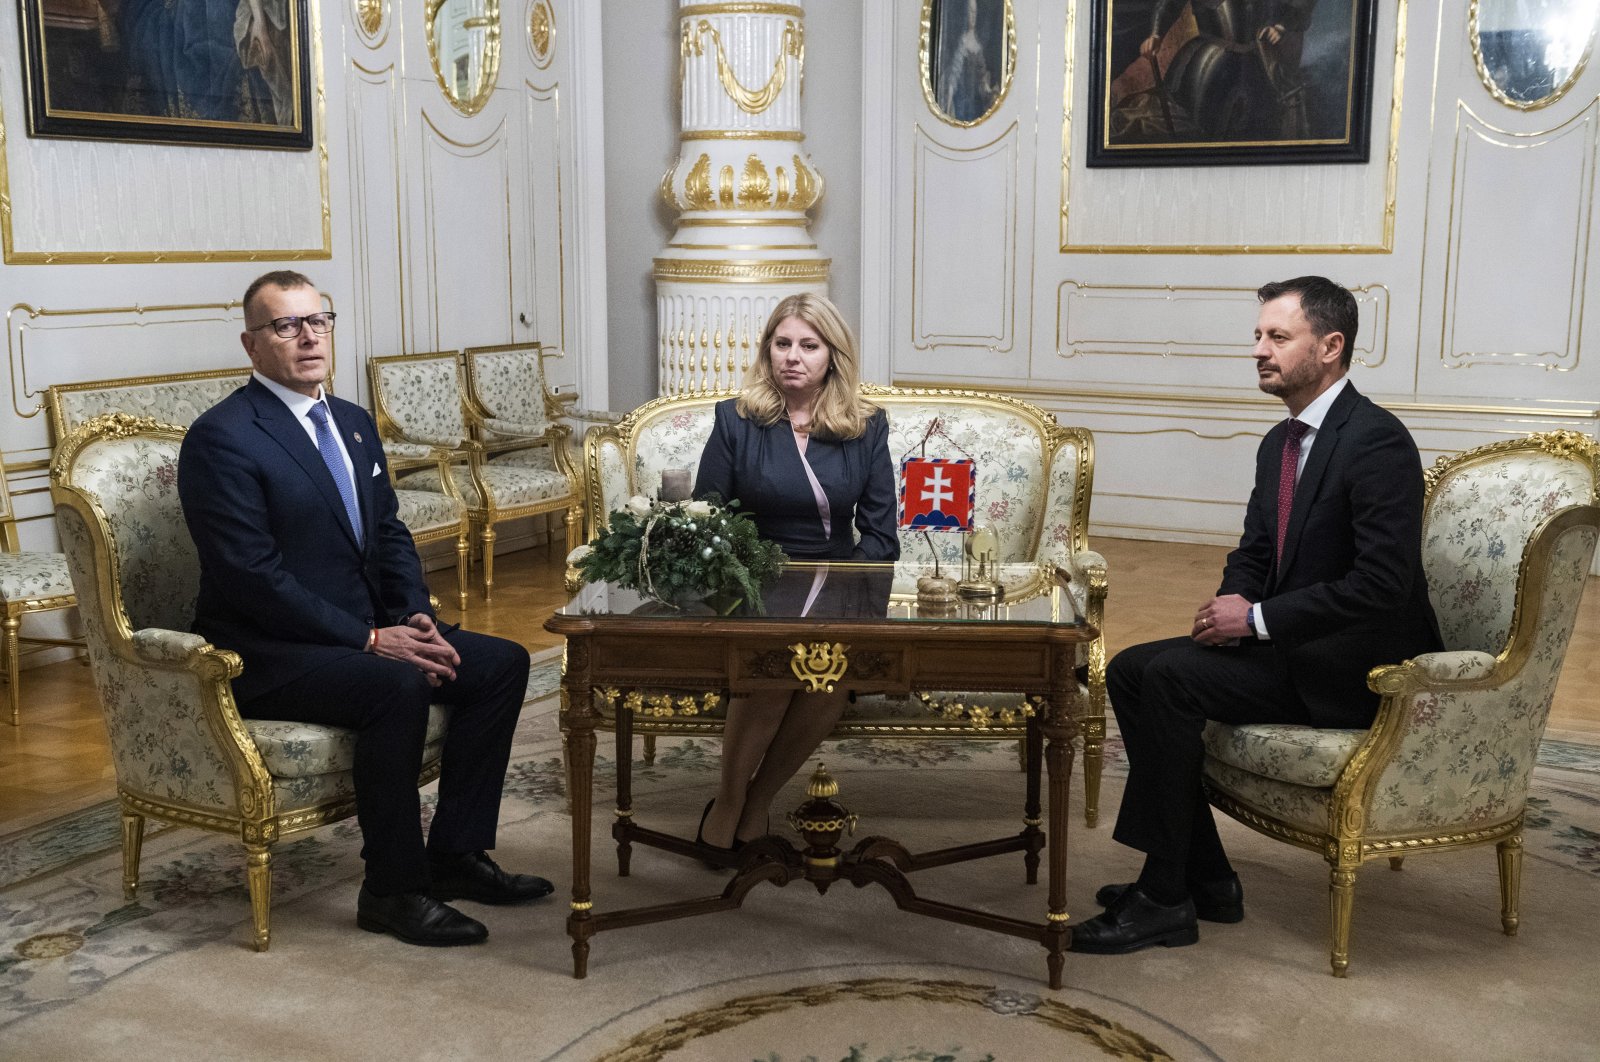 Slovakia&#039;s Prime Minister Eduard Heger (right) and House Chair Boris Kollar (left) meet Slovakia&#039;s President Zuzana Caputova, after Parliament where a vote expressed no-confidence in Heger&#039;s Government, at the Presidential Palace, in Bratislava, Thursday, Dec. 15, 2022. (AP Photo)